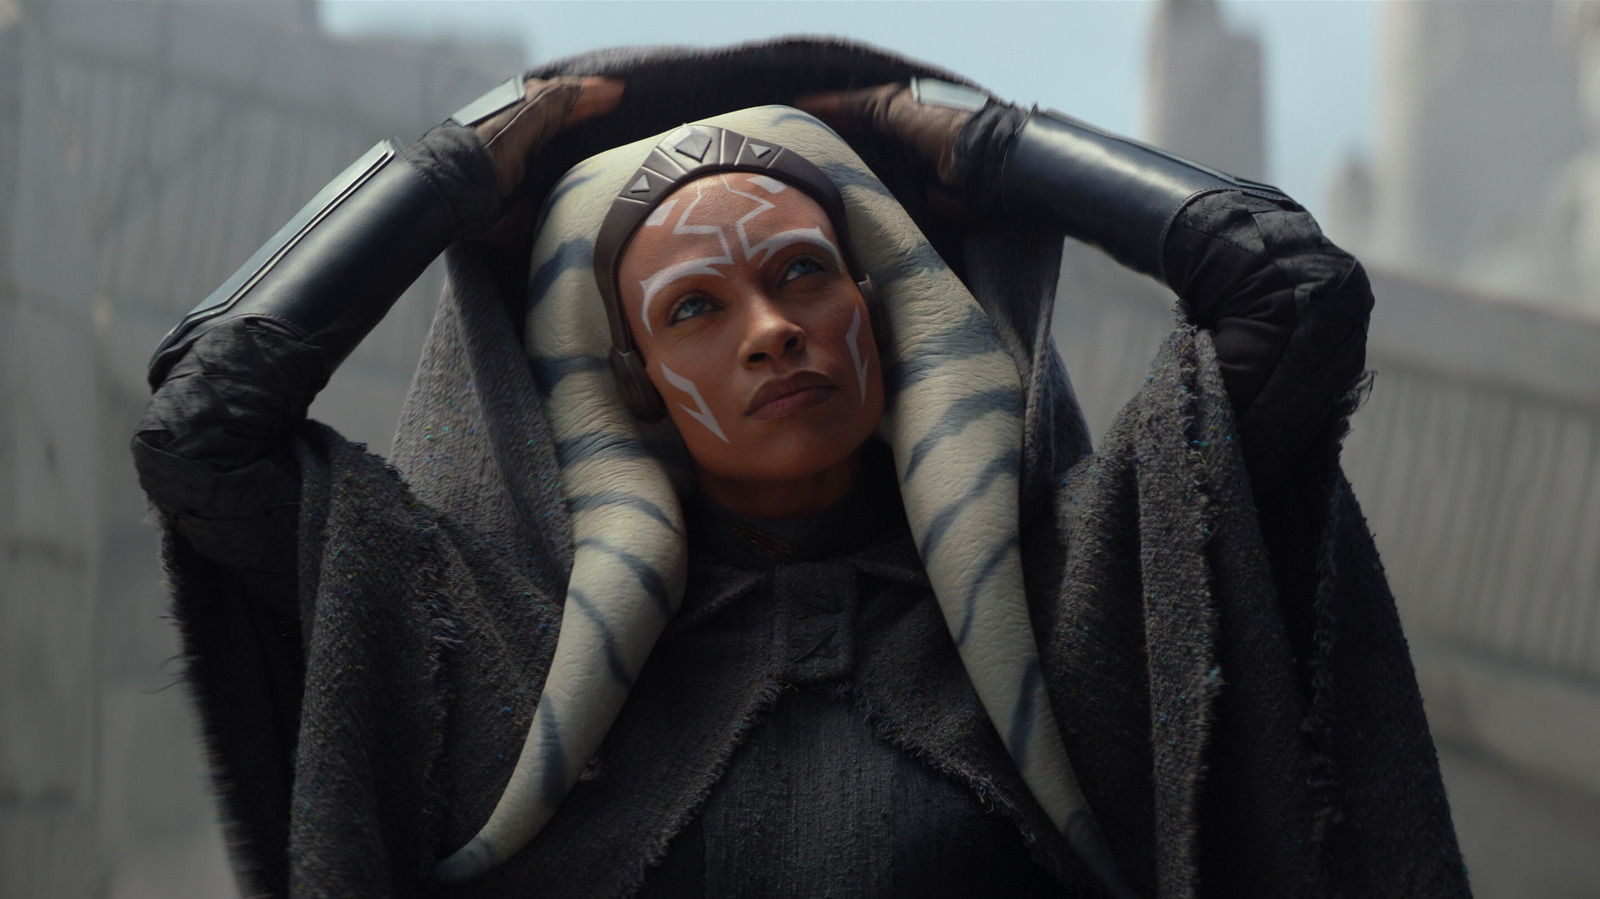 Joining Star Wars And Playing Ahsoka Required An Entire Lifestyle Shift For Rosario Dawson